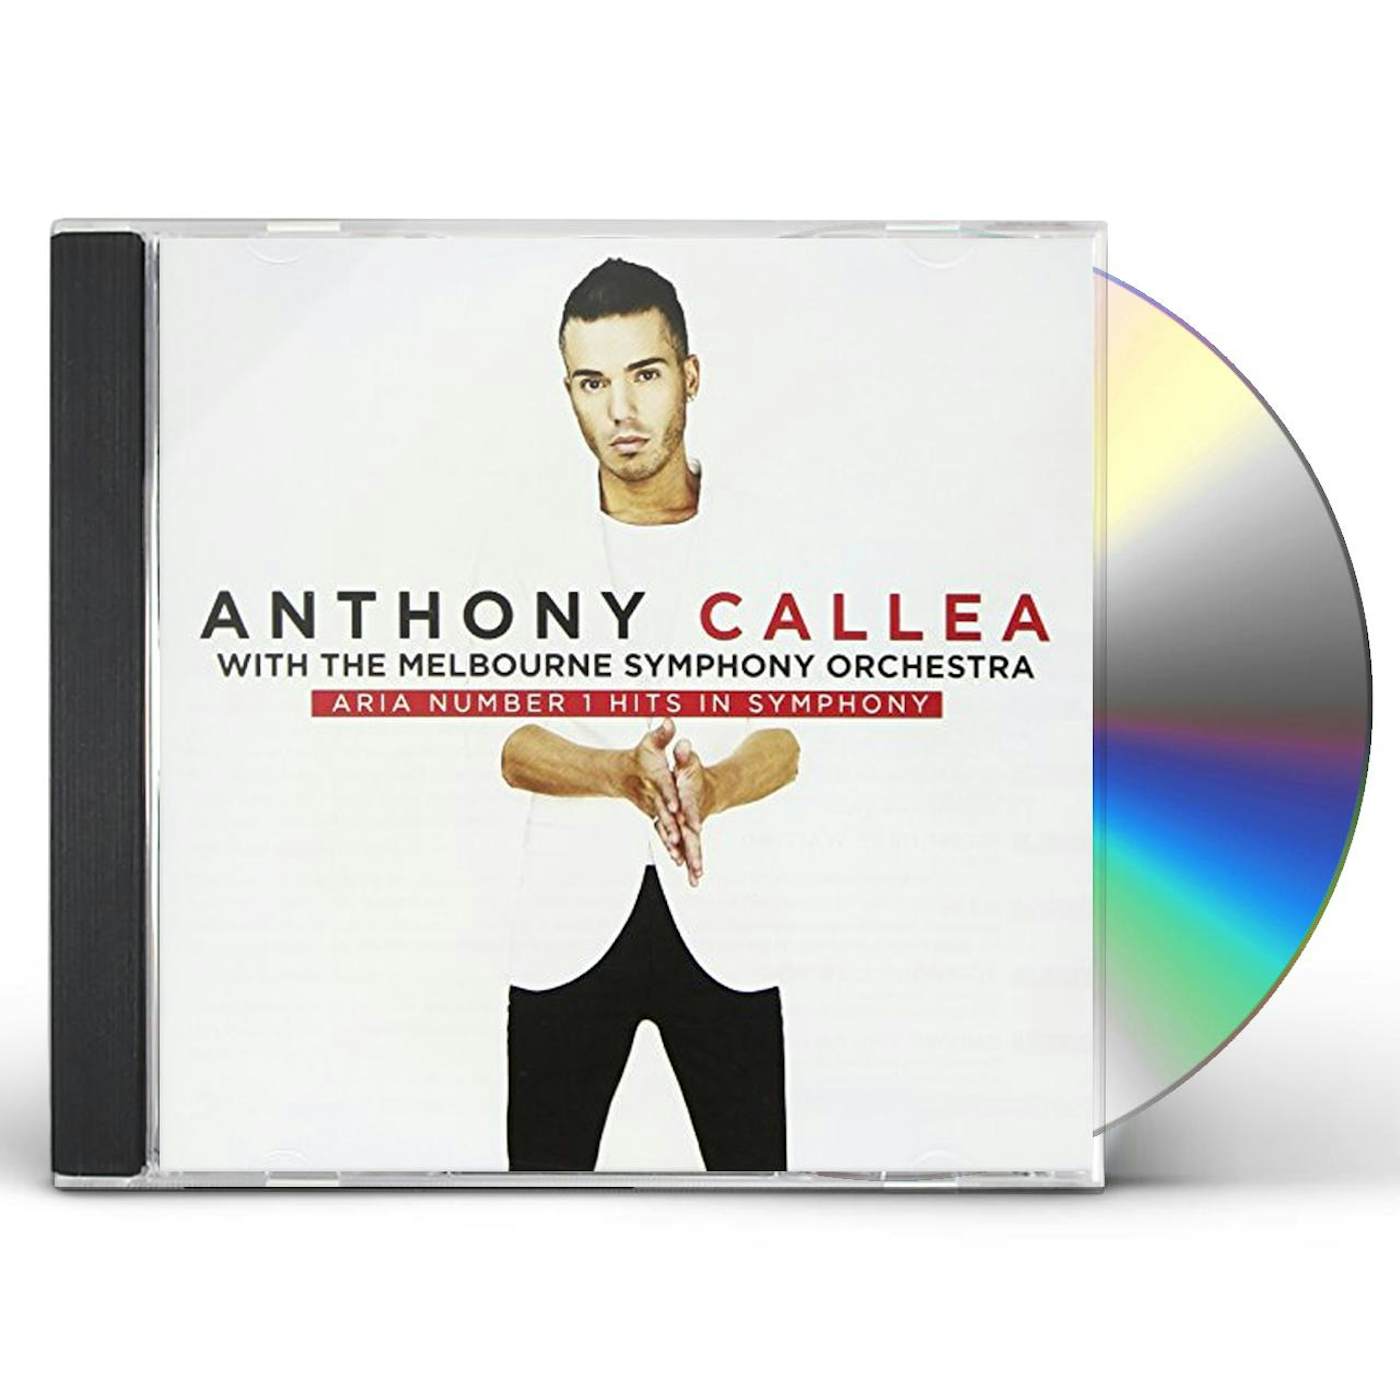 Anthony Callea ARIA NUMBER 1 HITS IN SYMPHONY CD